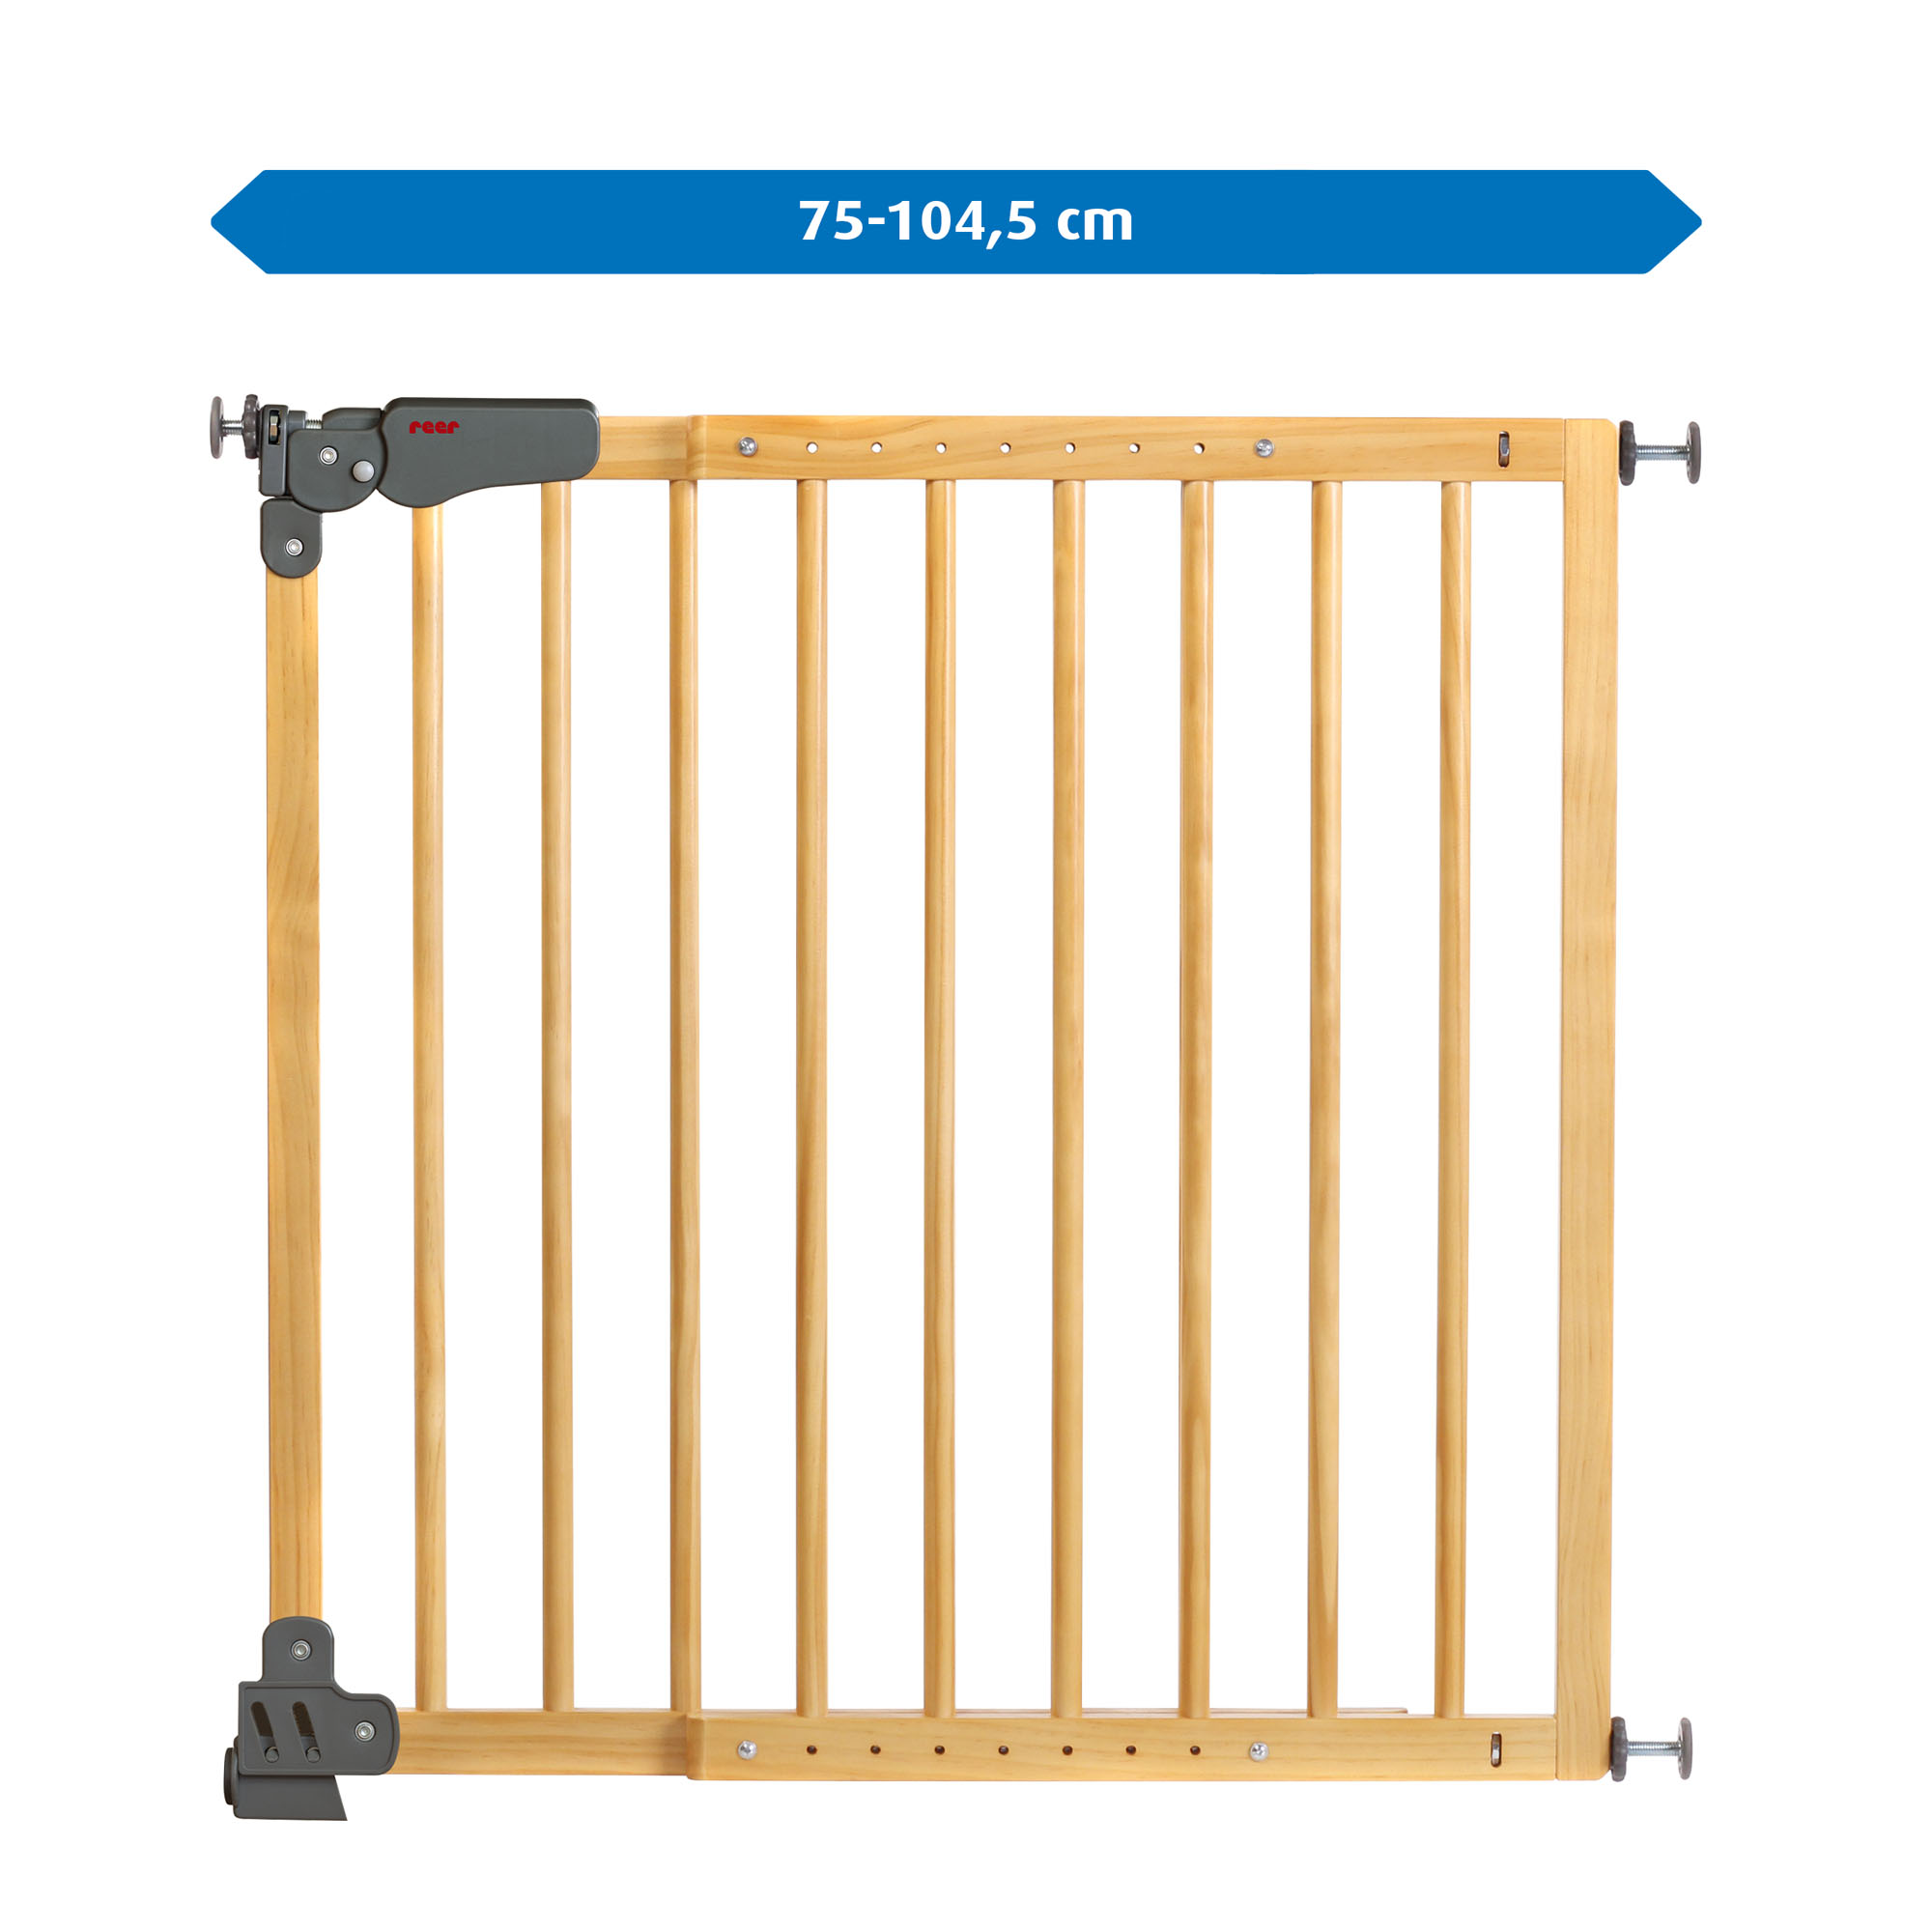 Basic Twin fix gate for gateway widths from 75 to 104.5 cm